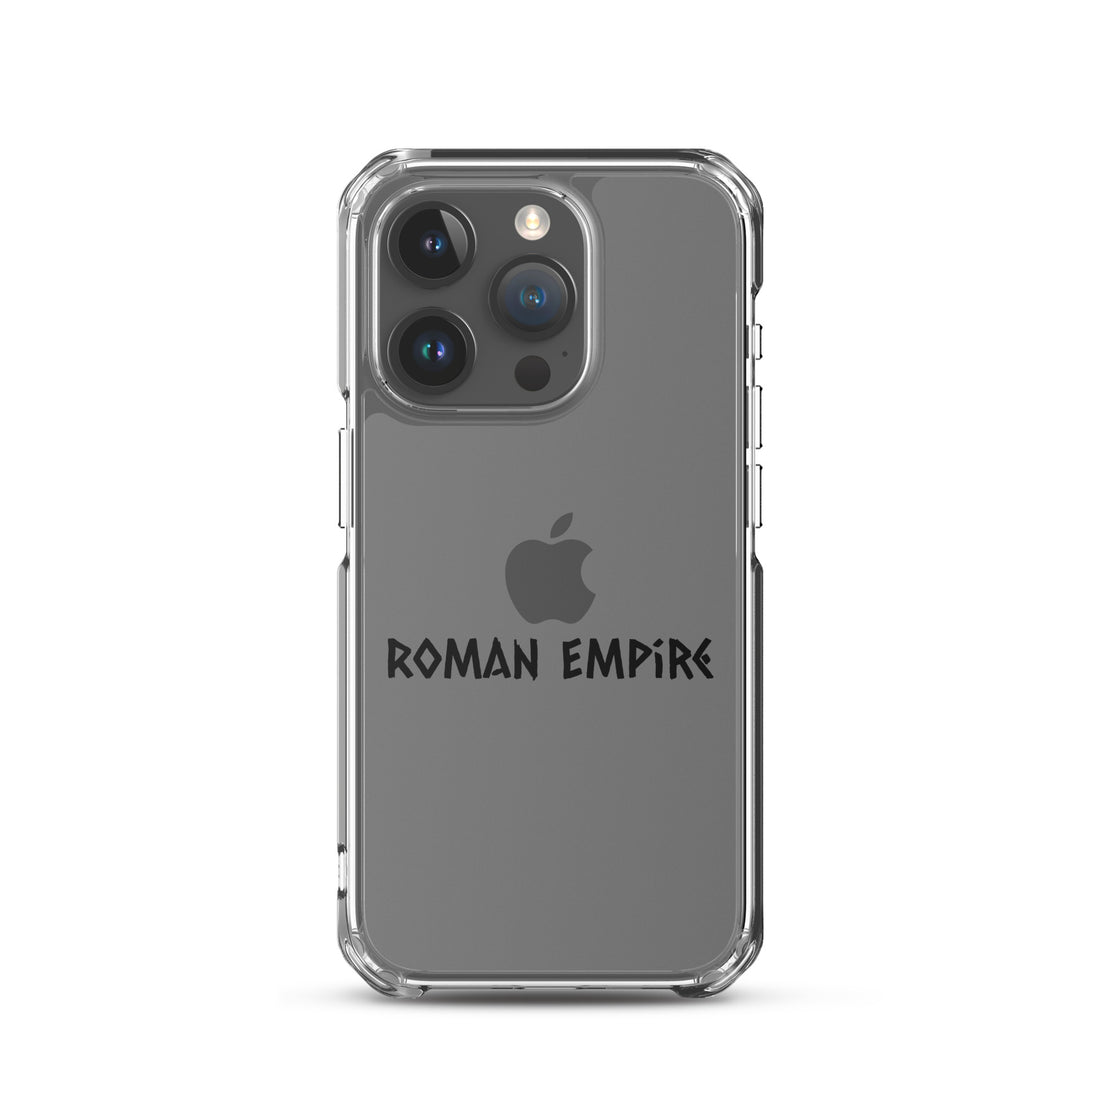 Clear Case for iphone - Roman Empire: Sleek Protection with Precise Port Openings